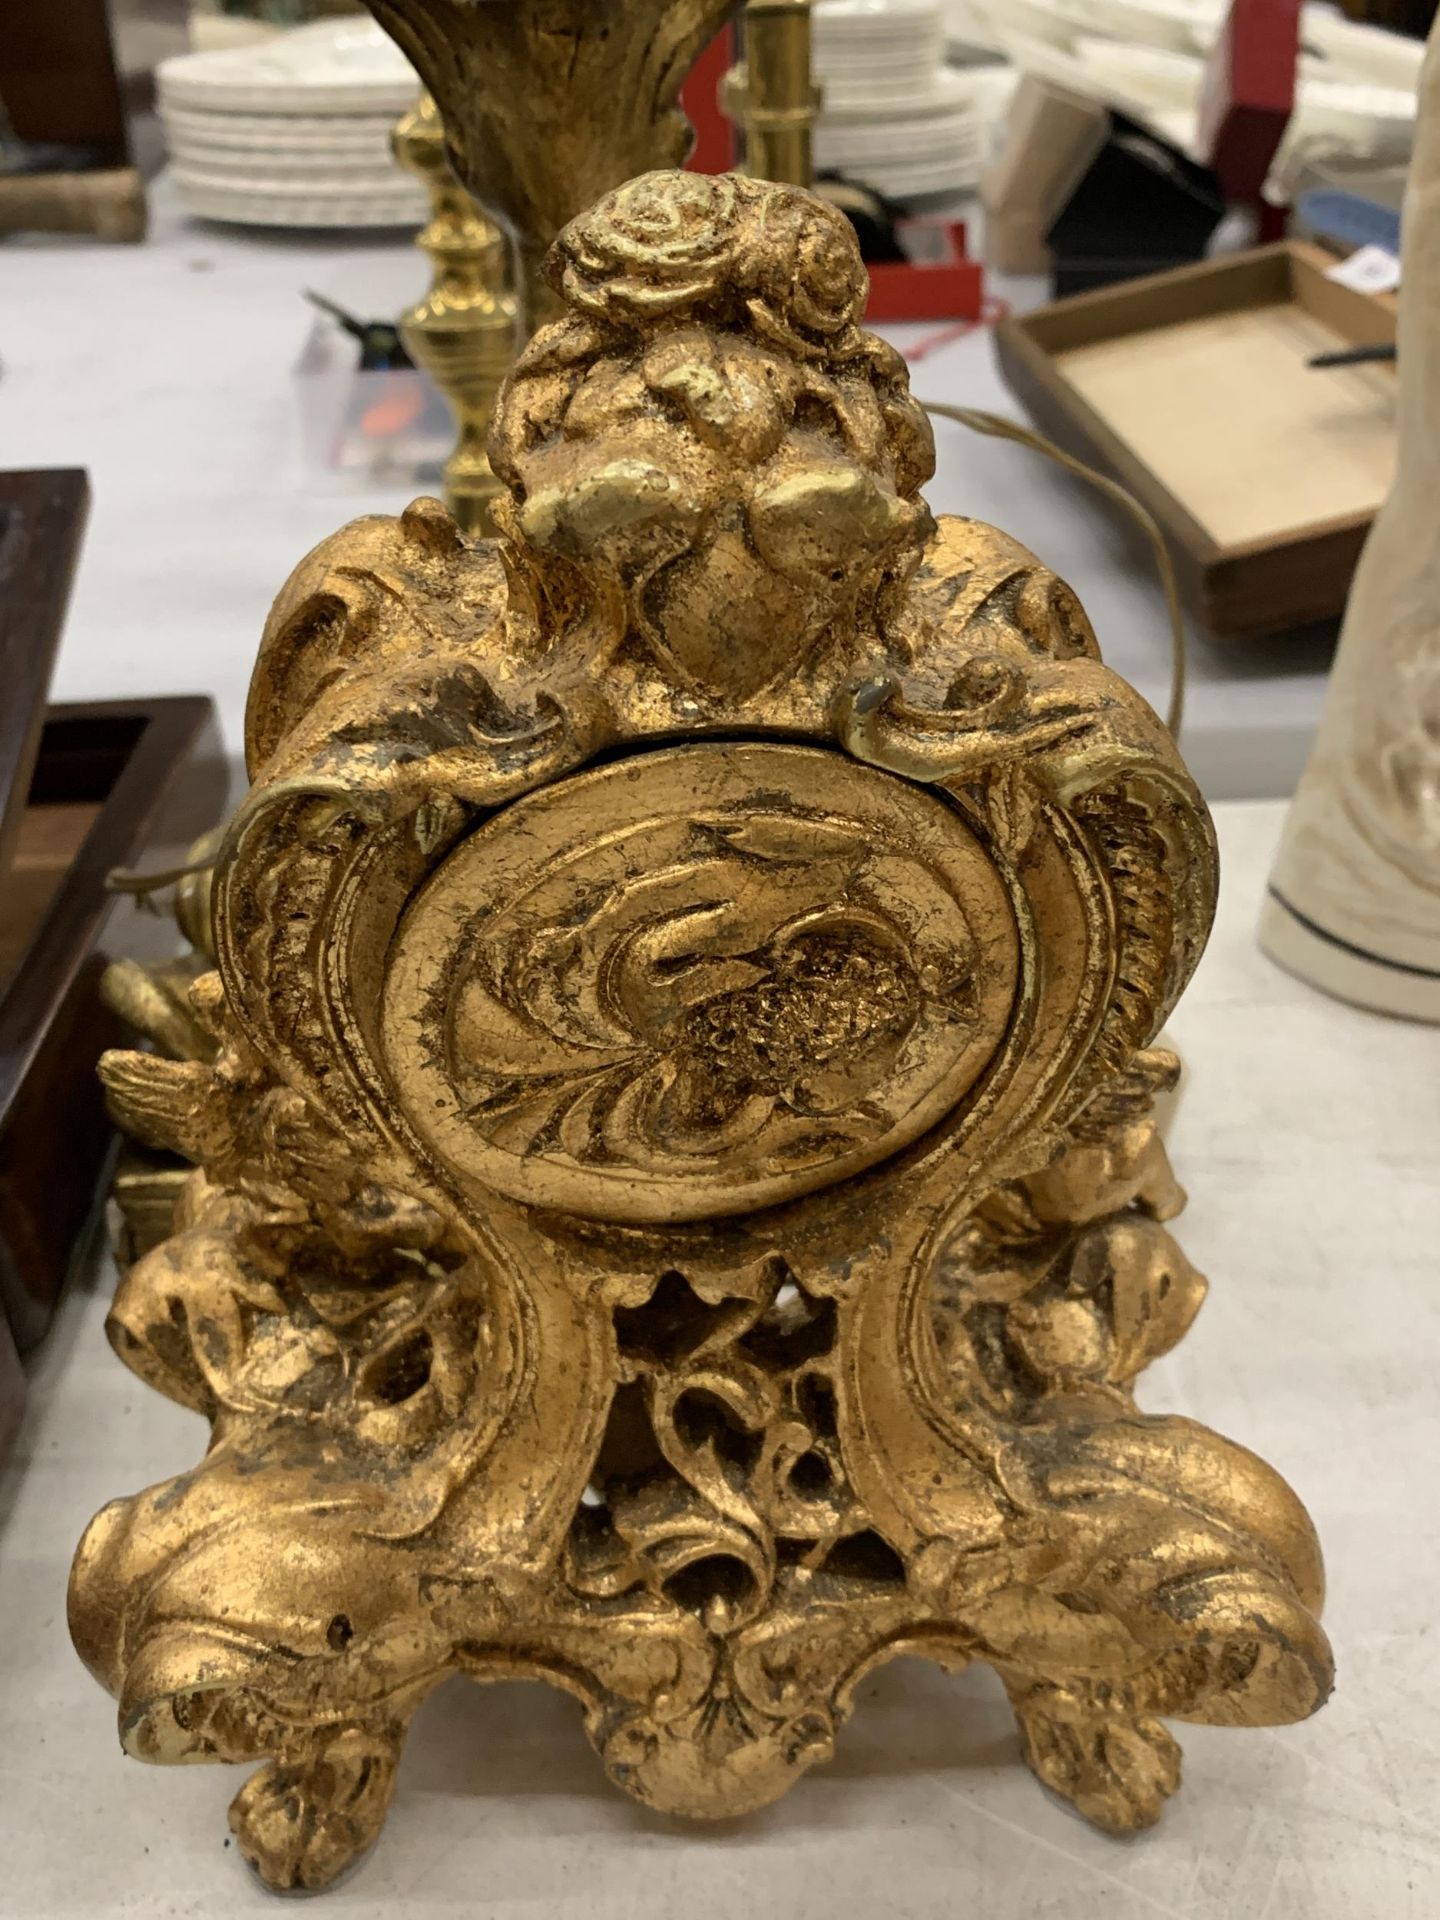 A VIANTAGE STYLE CLOCK WITH CLASSICAL GILT DECORATION PLUS A GILT TABLE LAMP IN THE FORM OF A FISH - Image 3 of 3